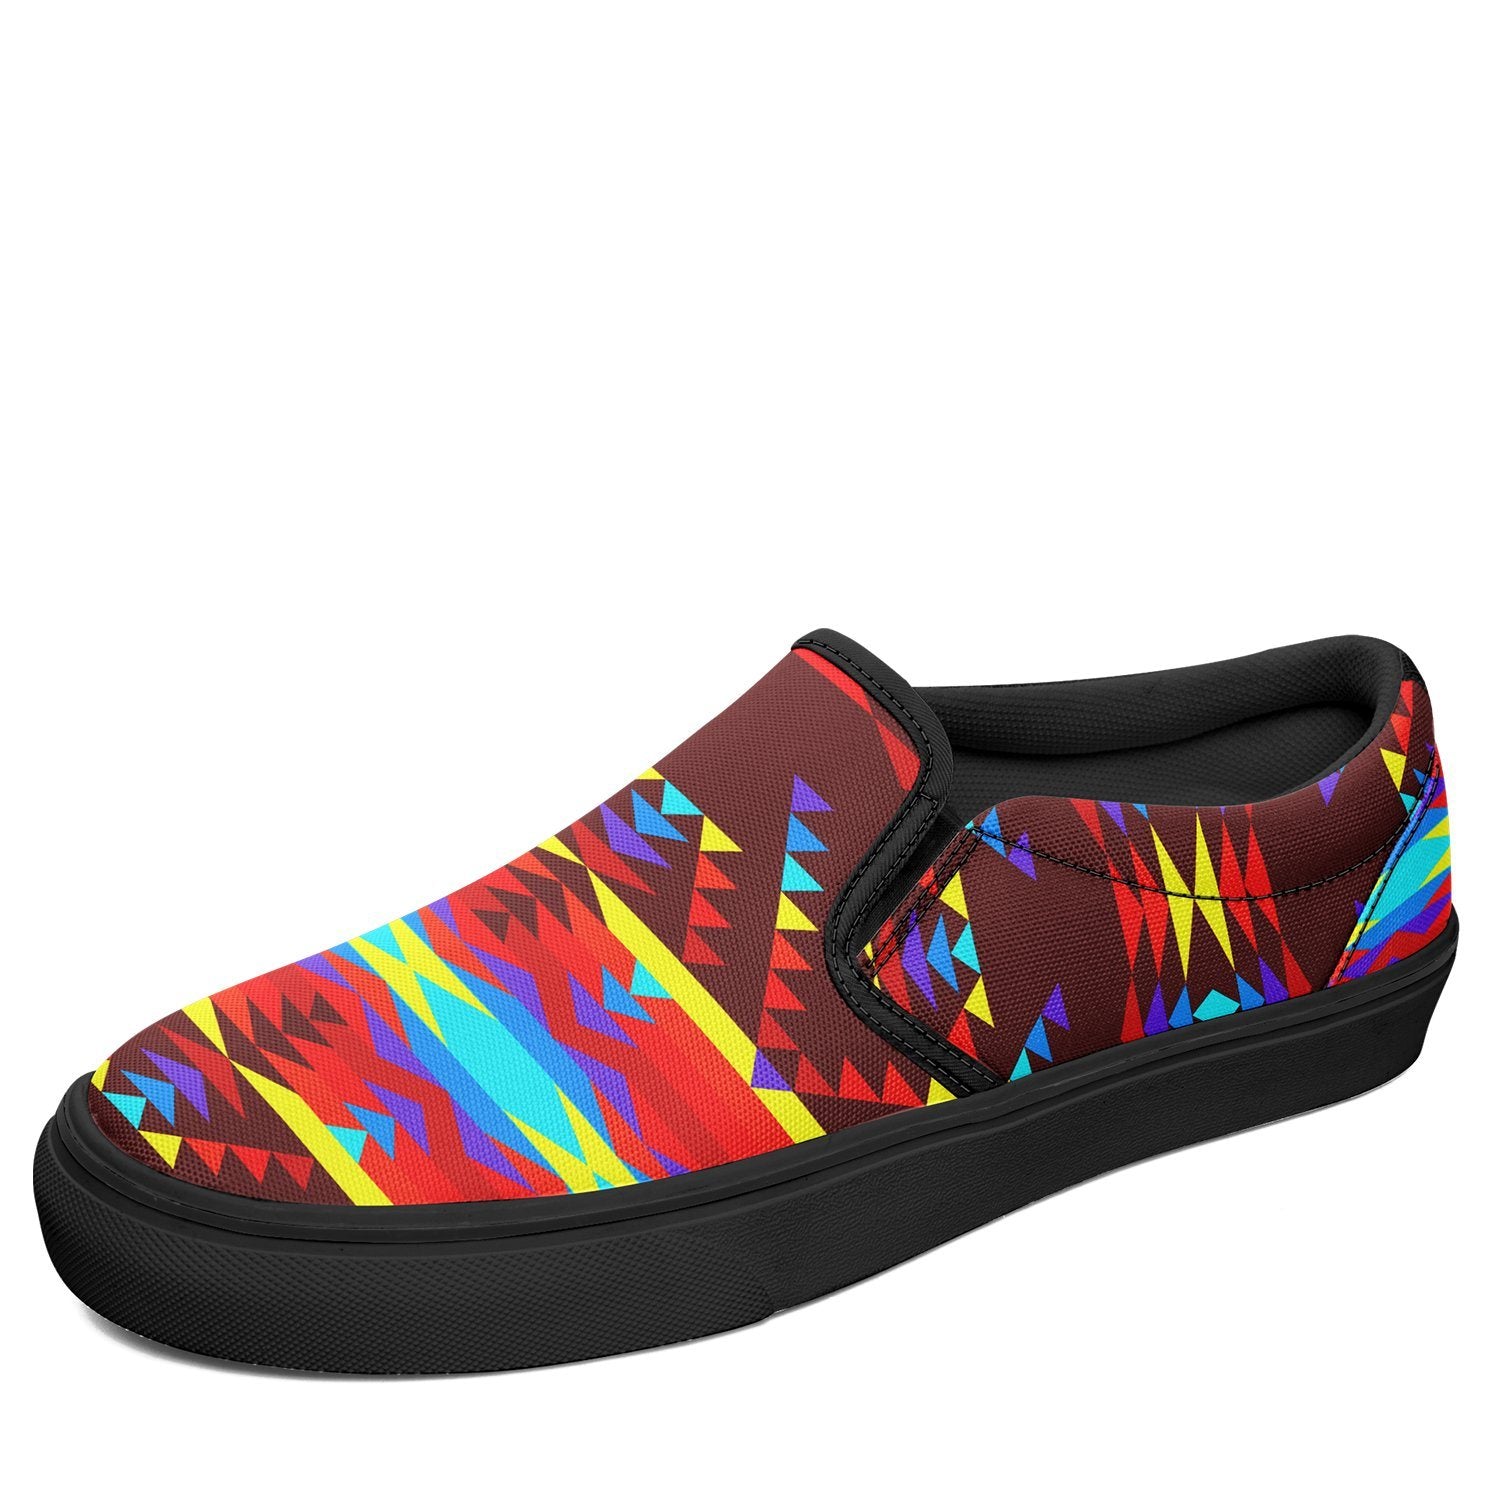 Visions of Lasting Peace Otoyimm Canvas Slip On Shoes 49 Dzine 